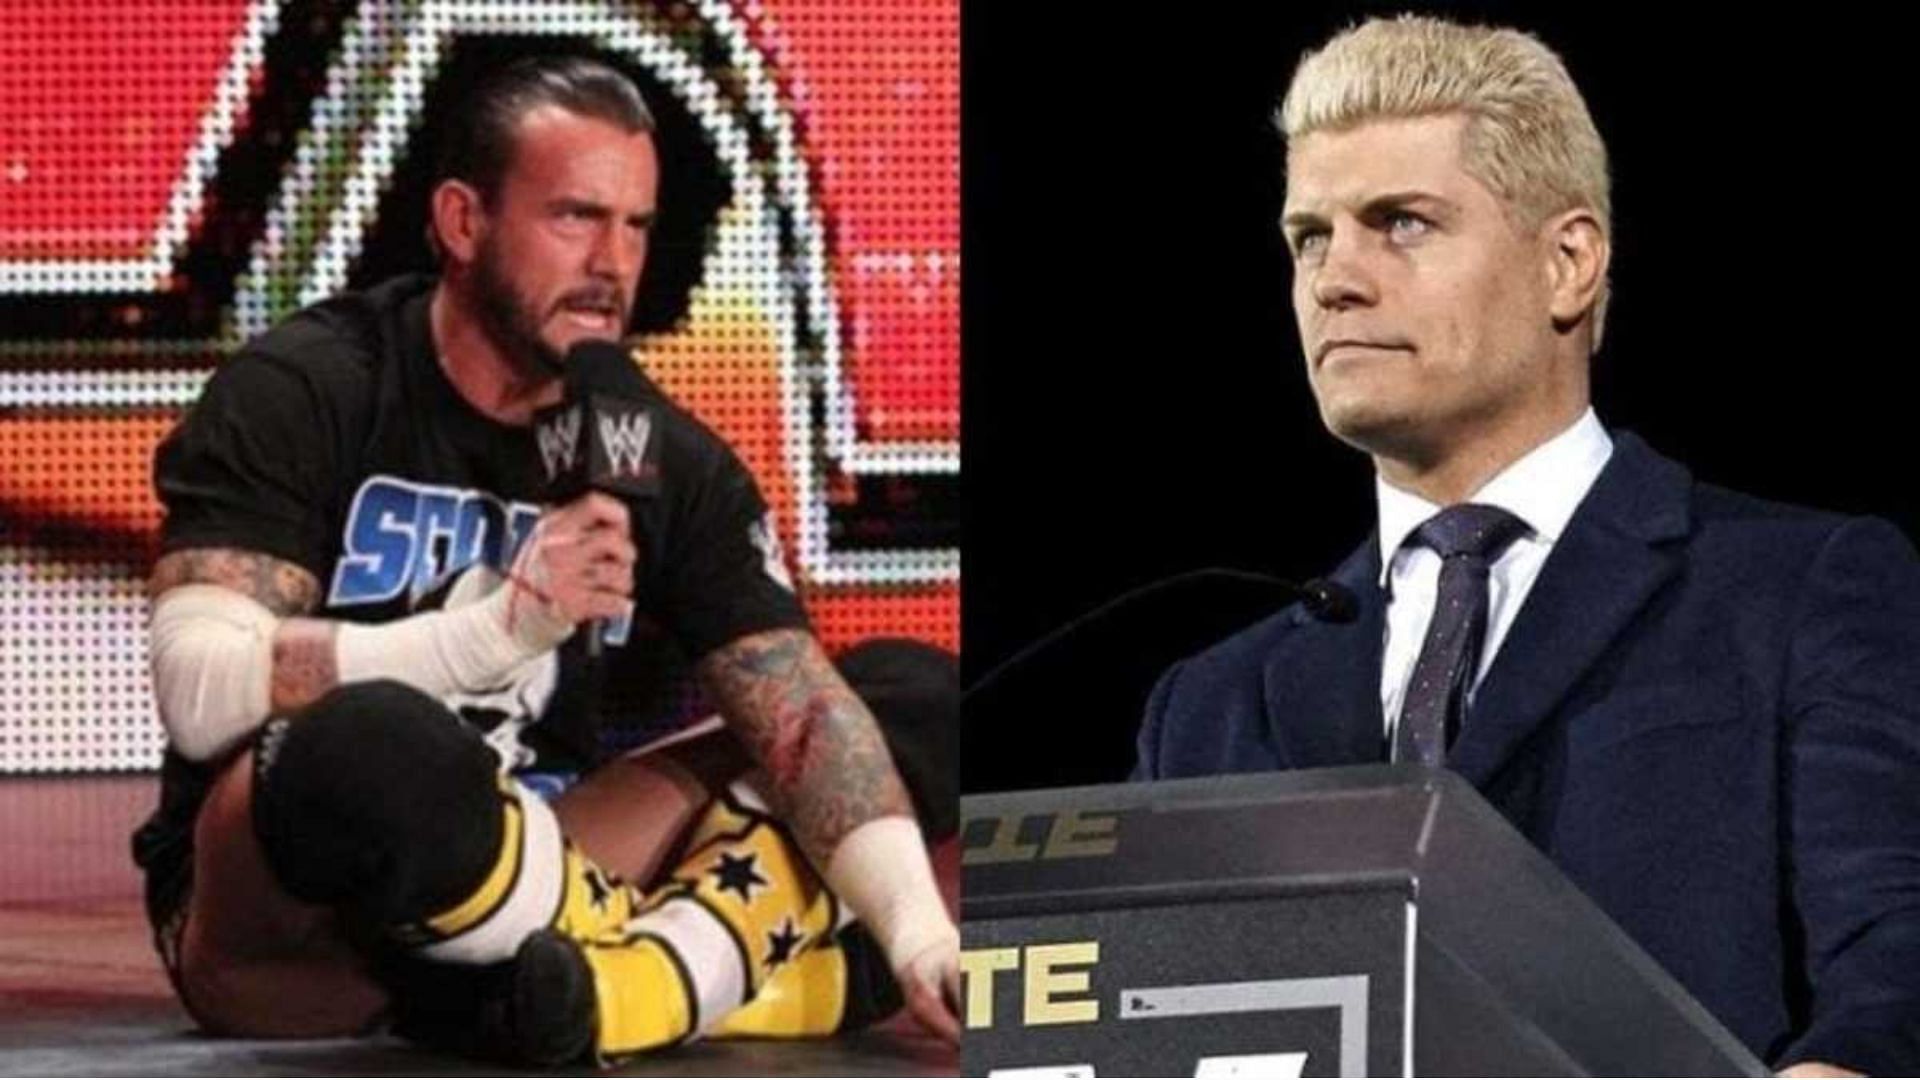 Could The American Nightmare and The Voice of the Voiceless come face-to-face in WWE?